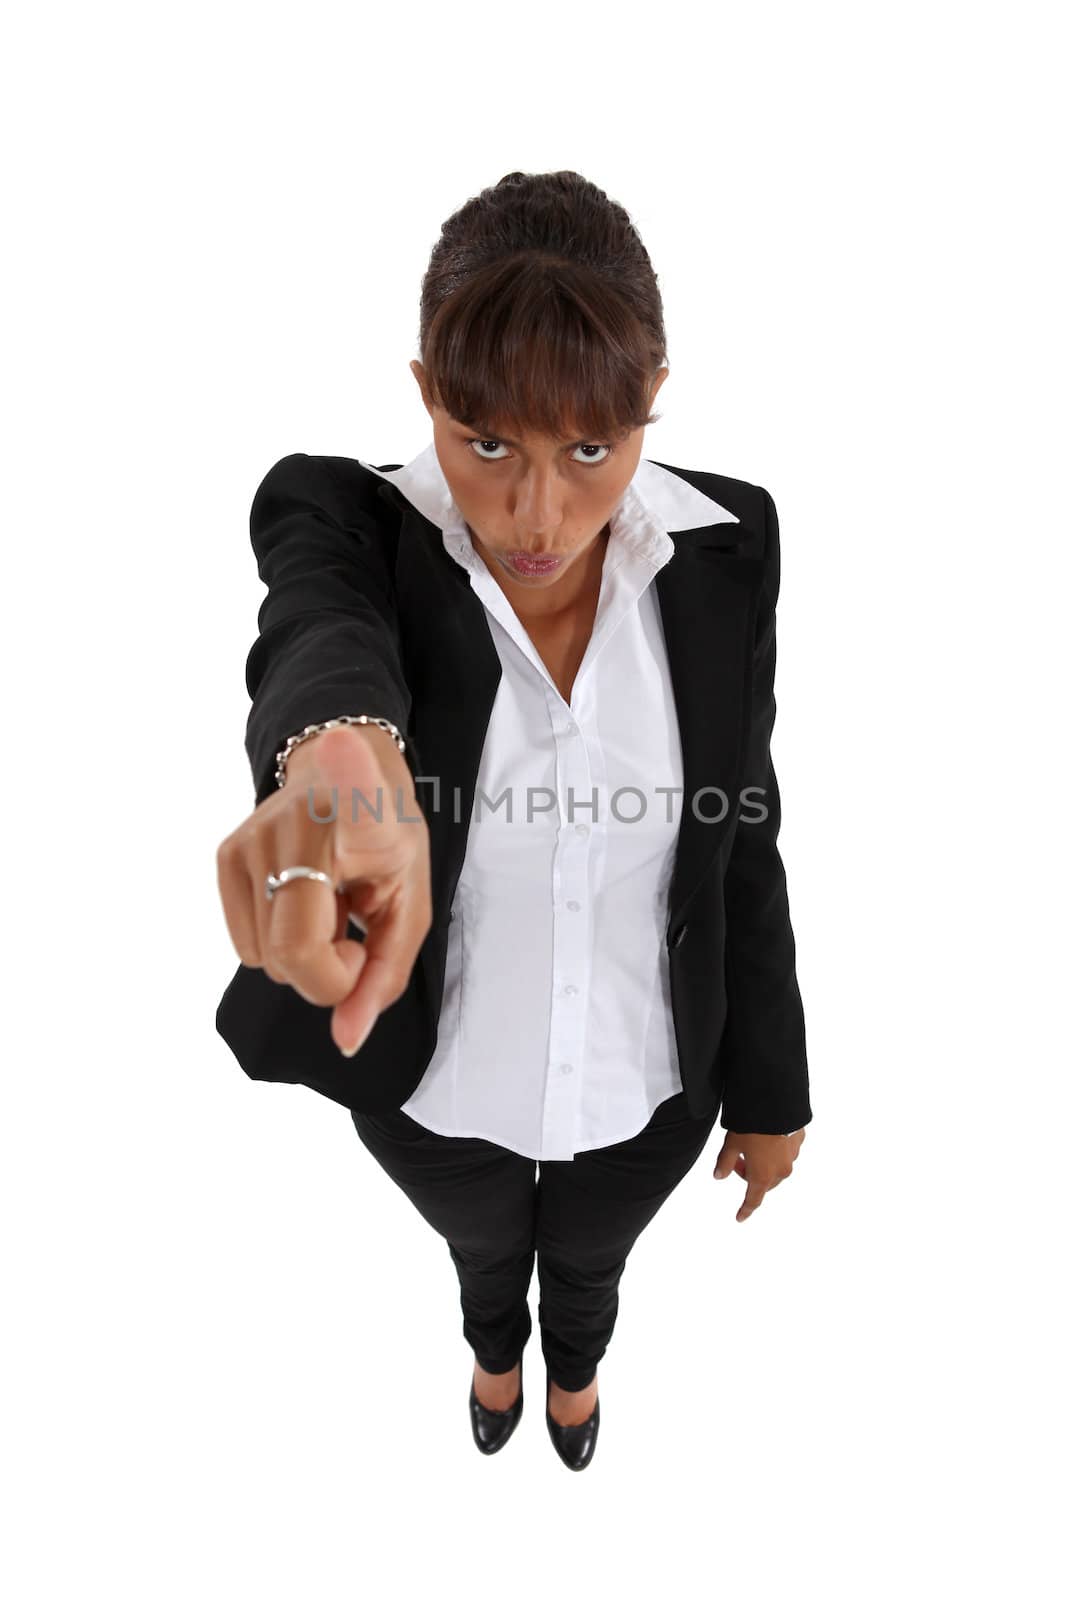 Woman threatening with her finger isolated on white background by phovoir